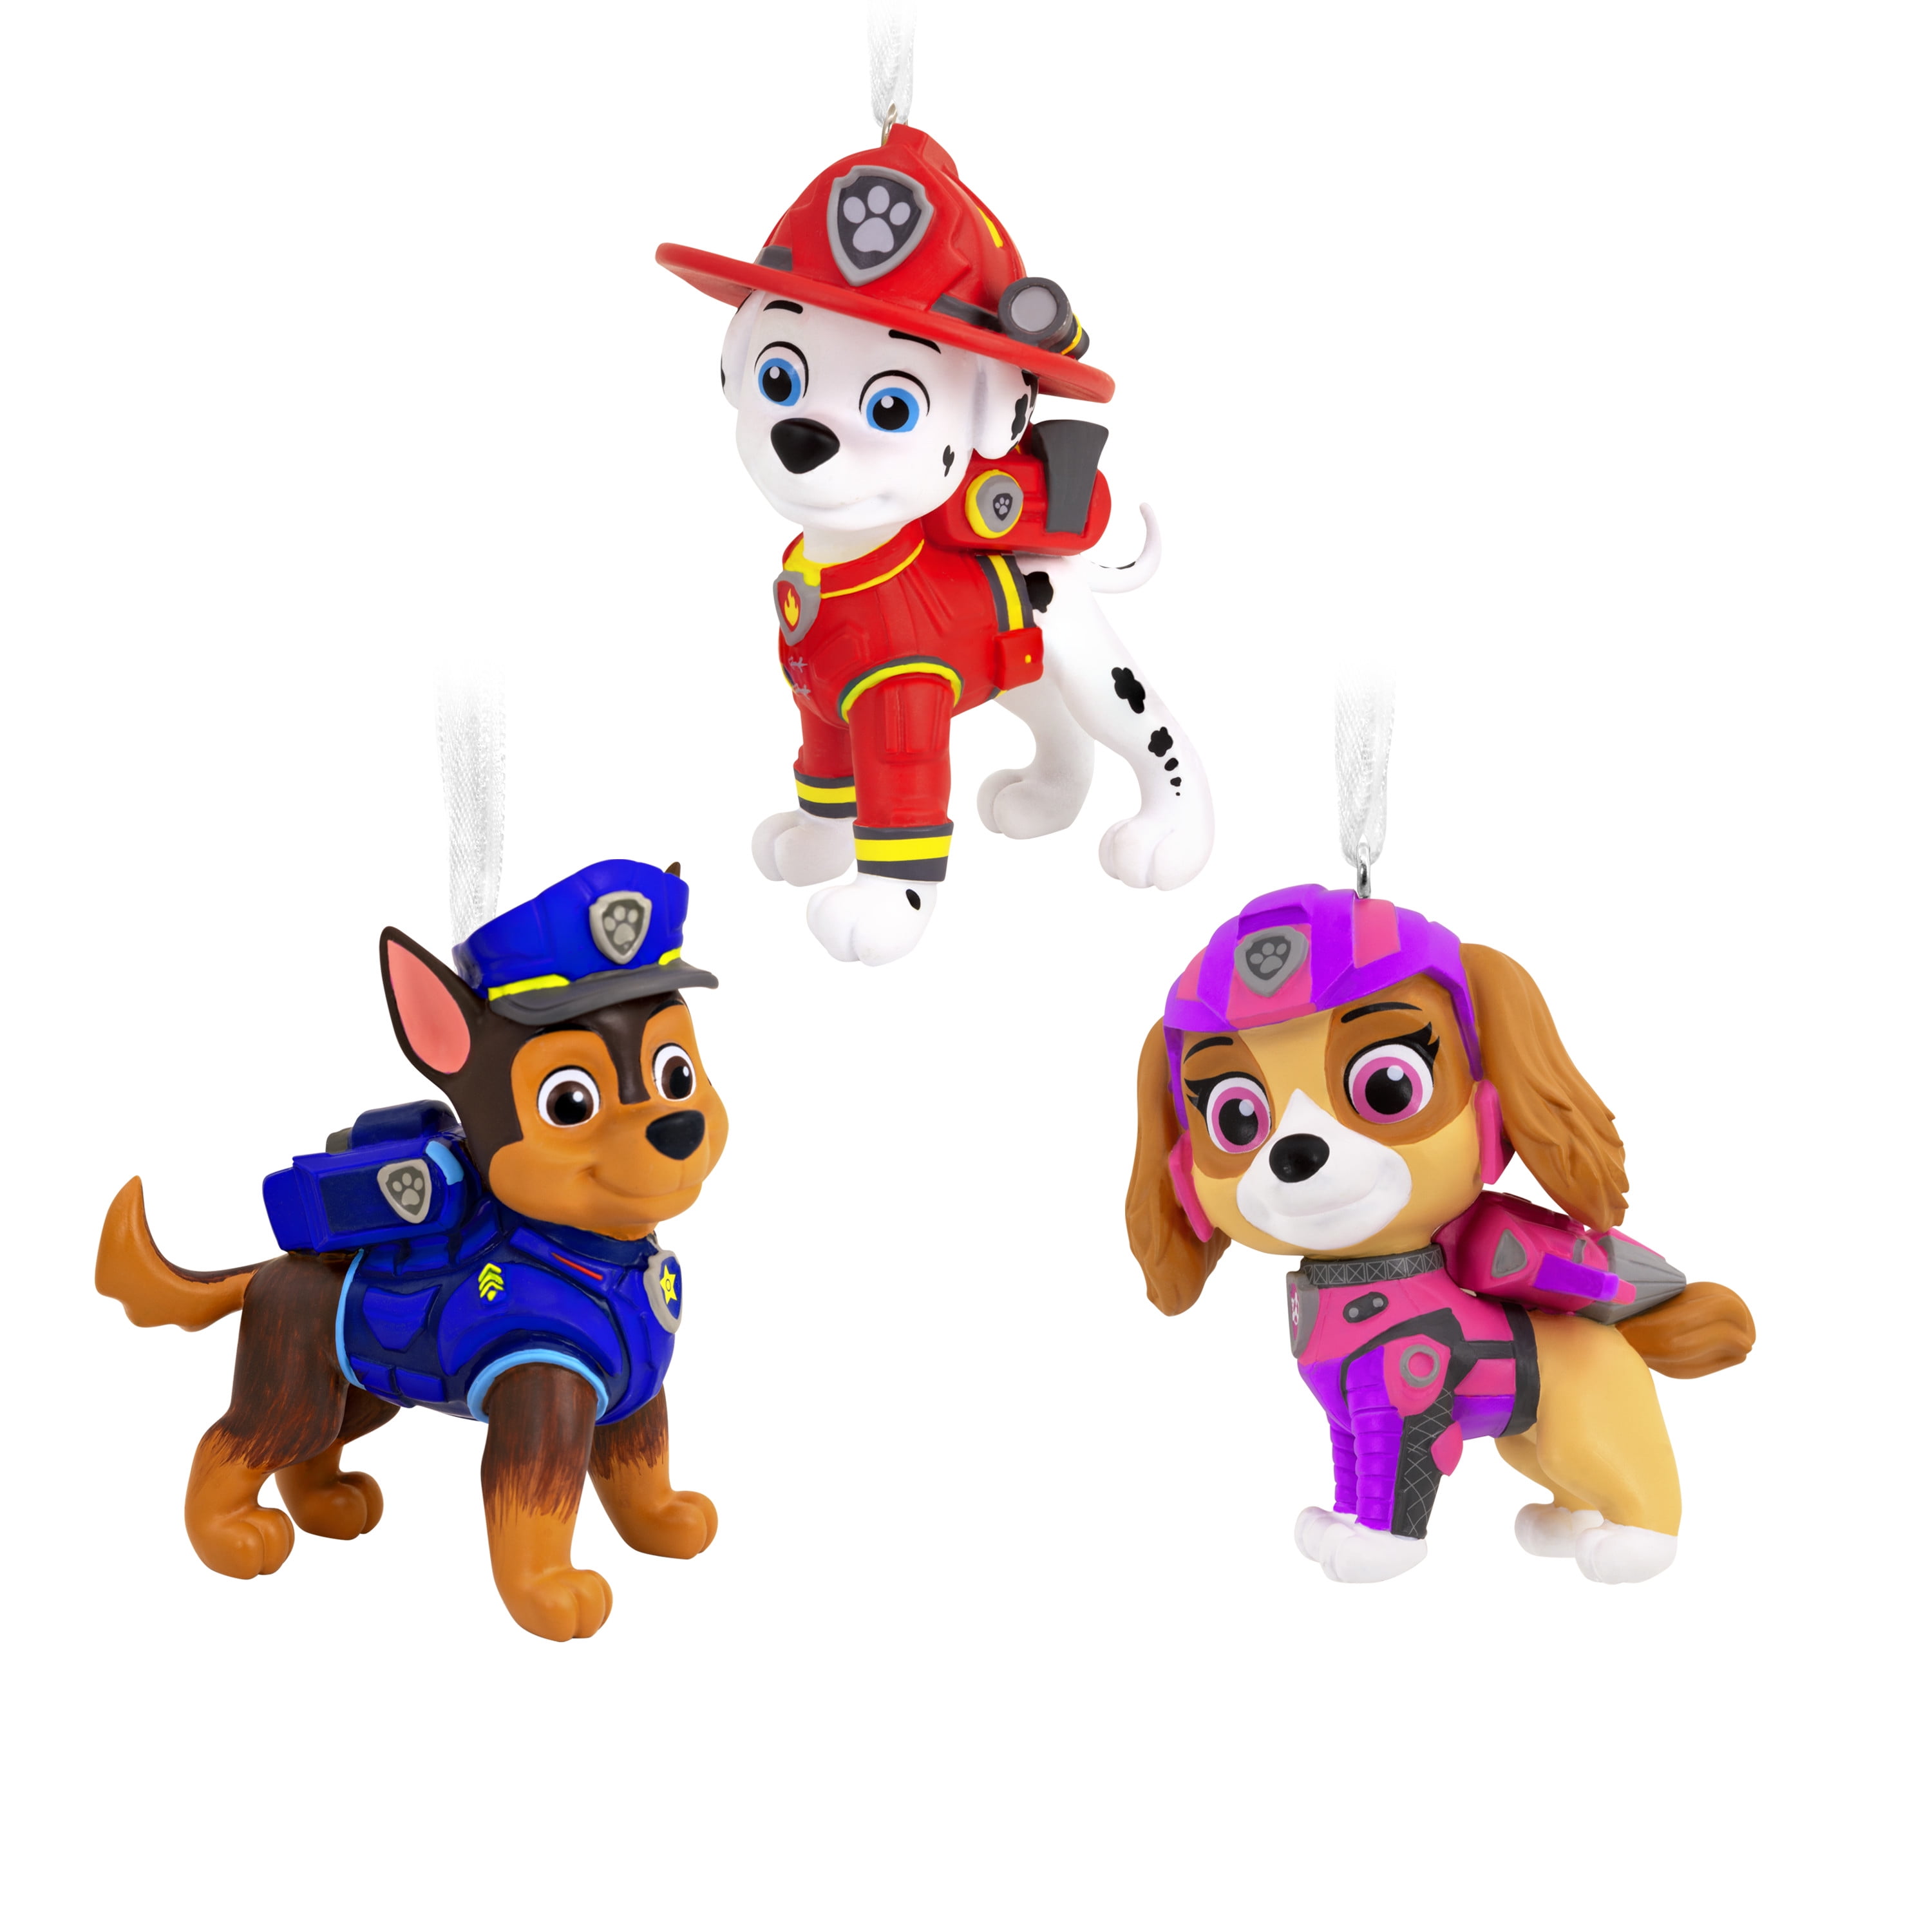 Details about   Paw Patrol™ Skye ornament 